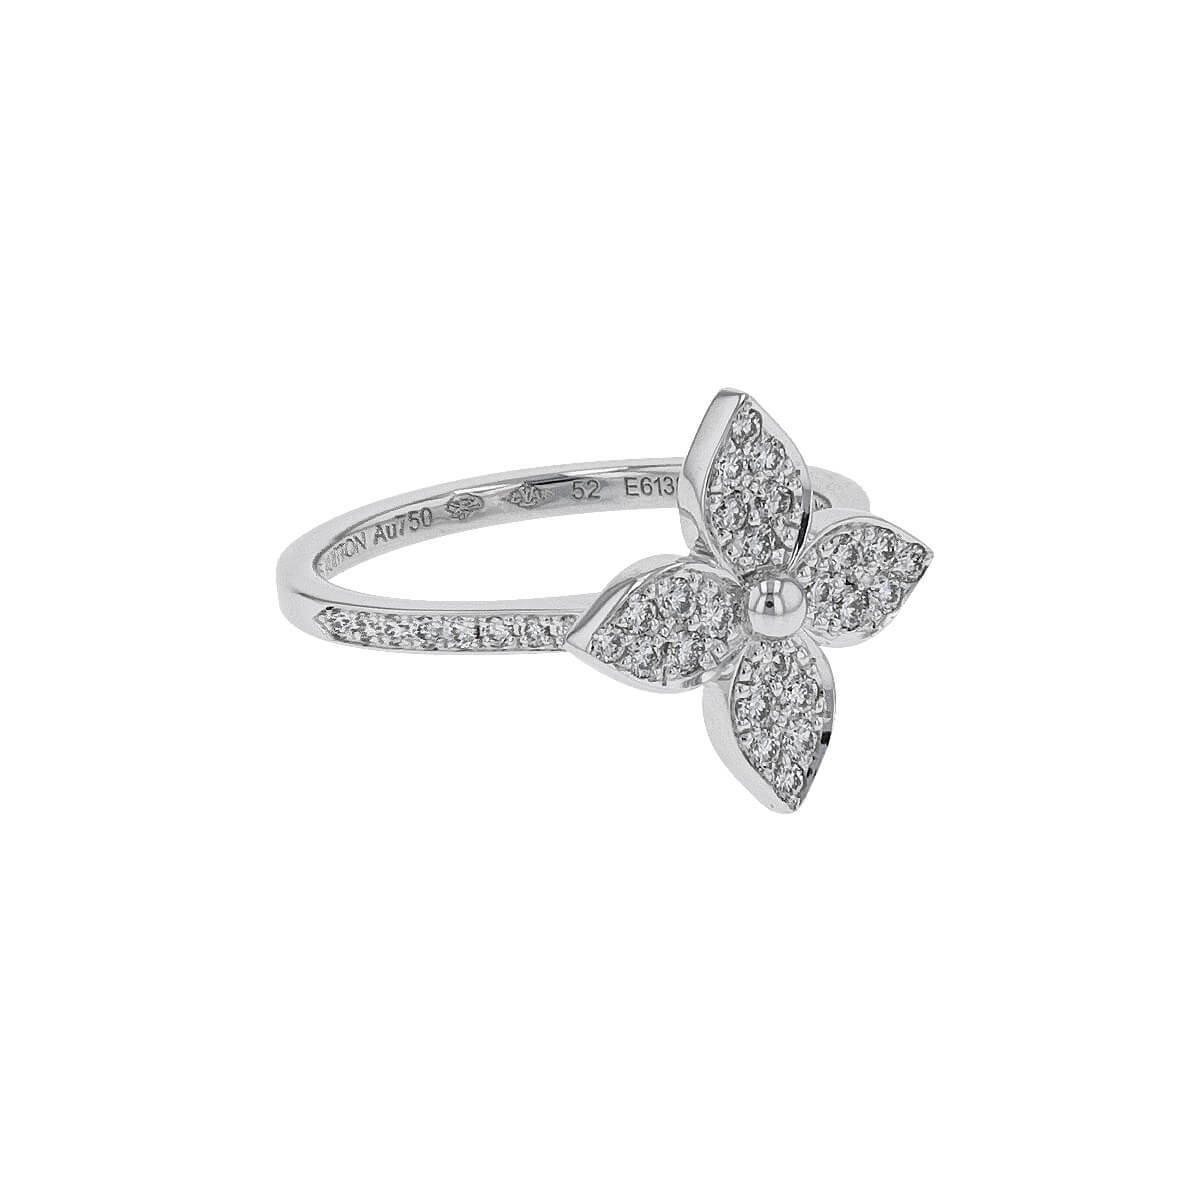 Louis Vuitton - Star Blossom Ring White Gold and Diamonds - Grey - Unisex - Size: 54 - Luxury